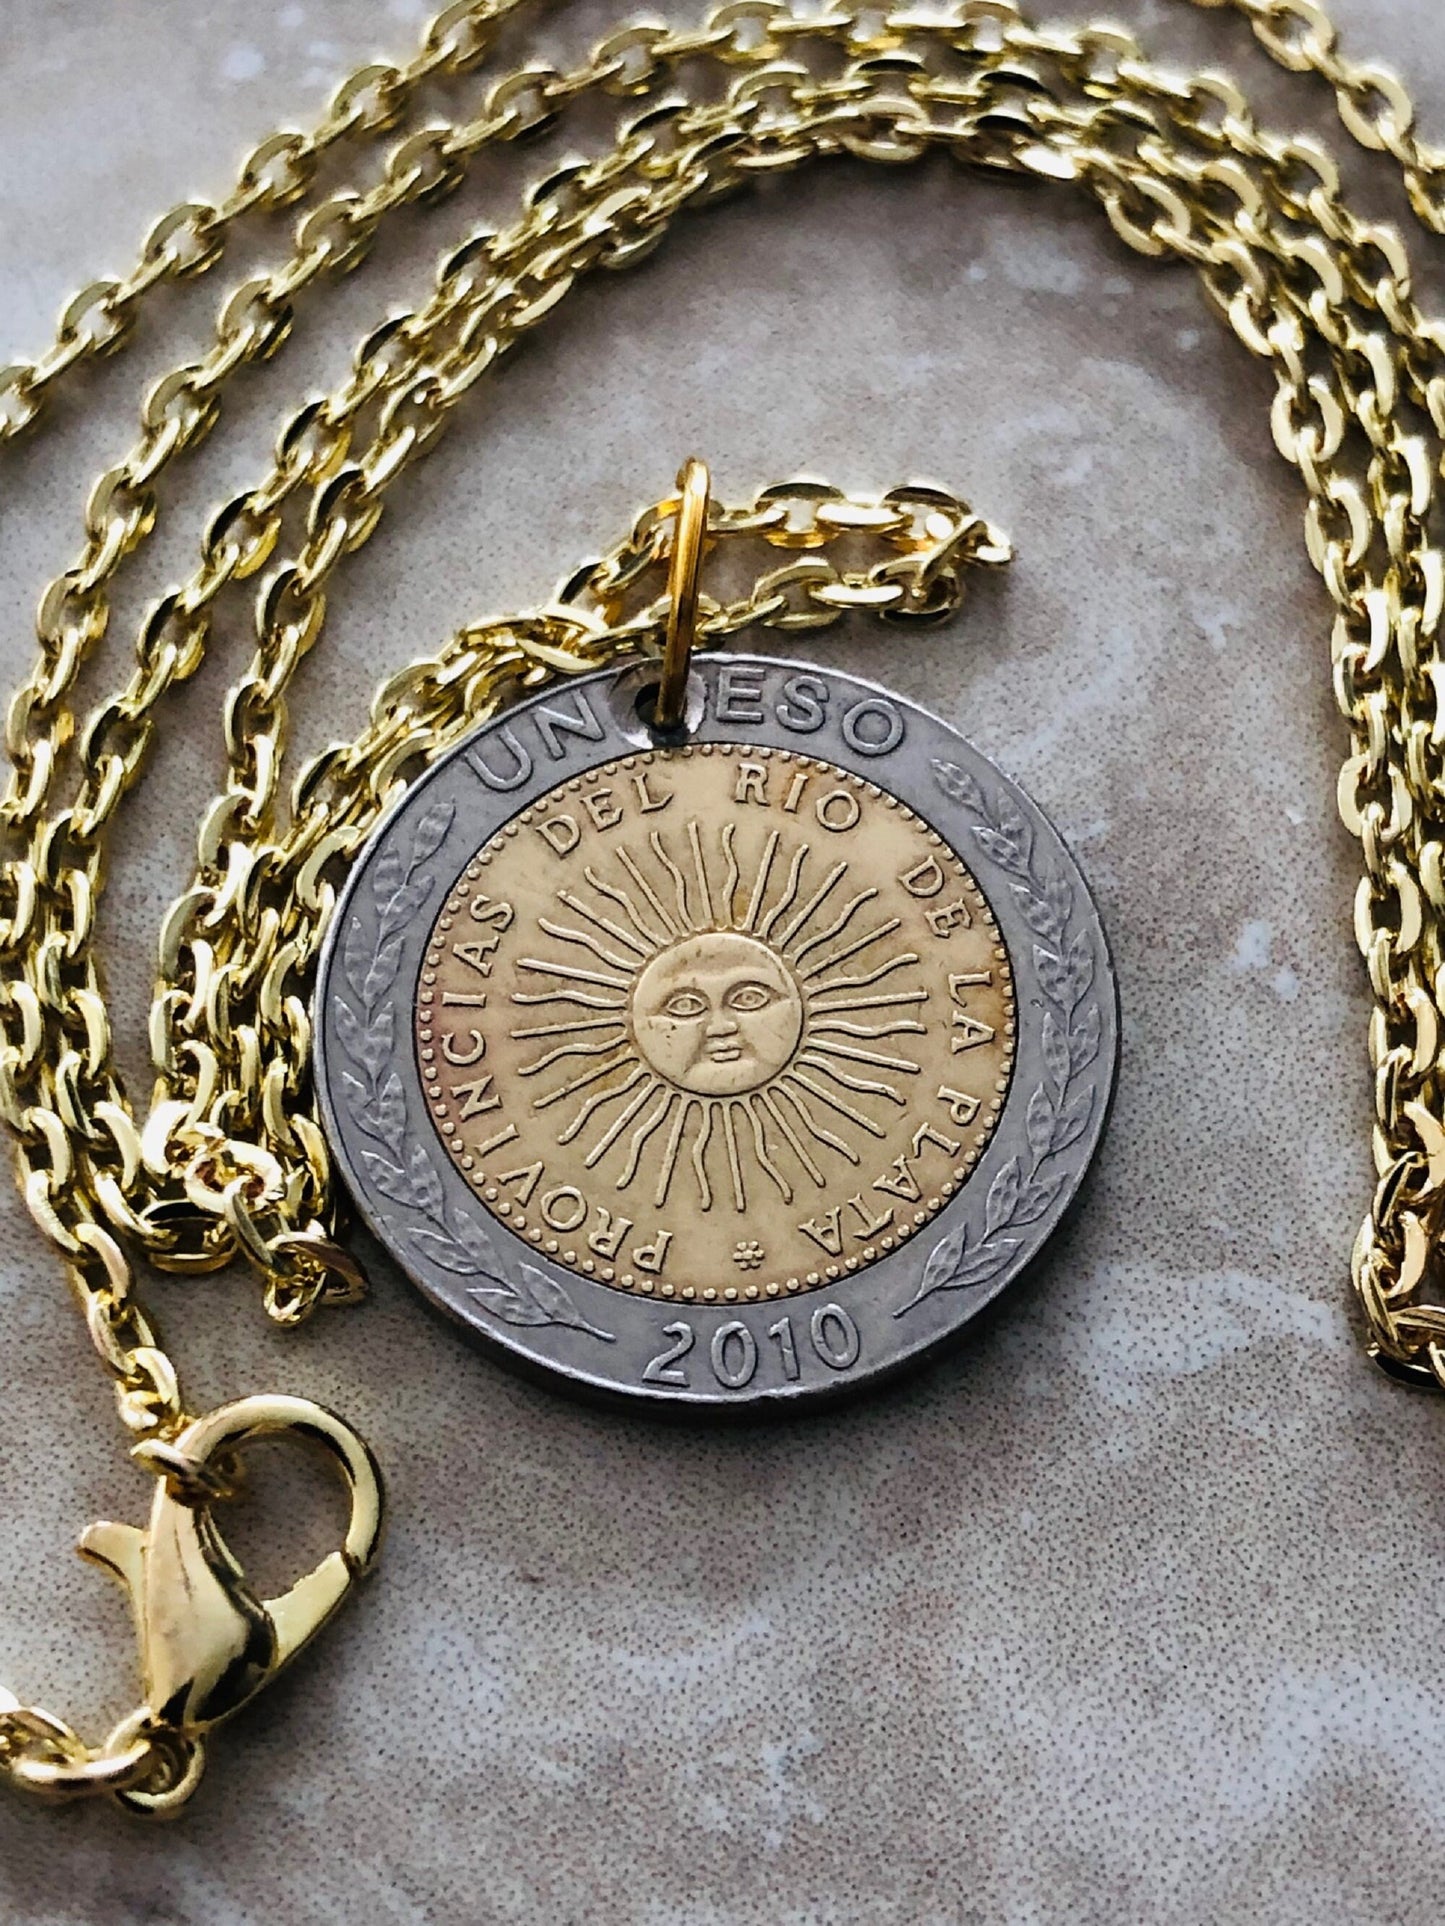 Argentina Coin Necklace Del Rio Argentinian Pendant Personal Old Vintage Handmade Jewelry Gift Friend Charm For Him Her World Coin Collector